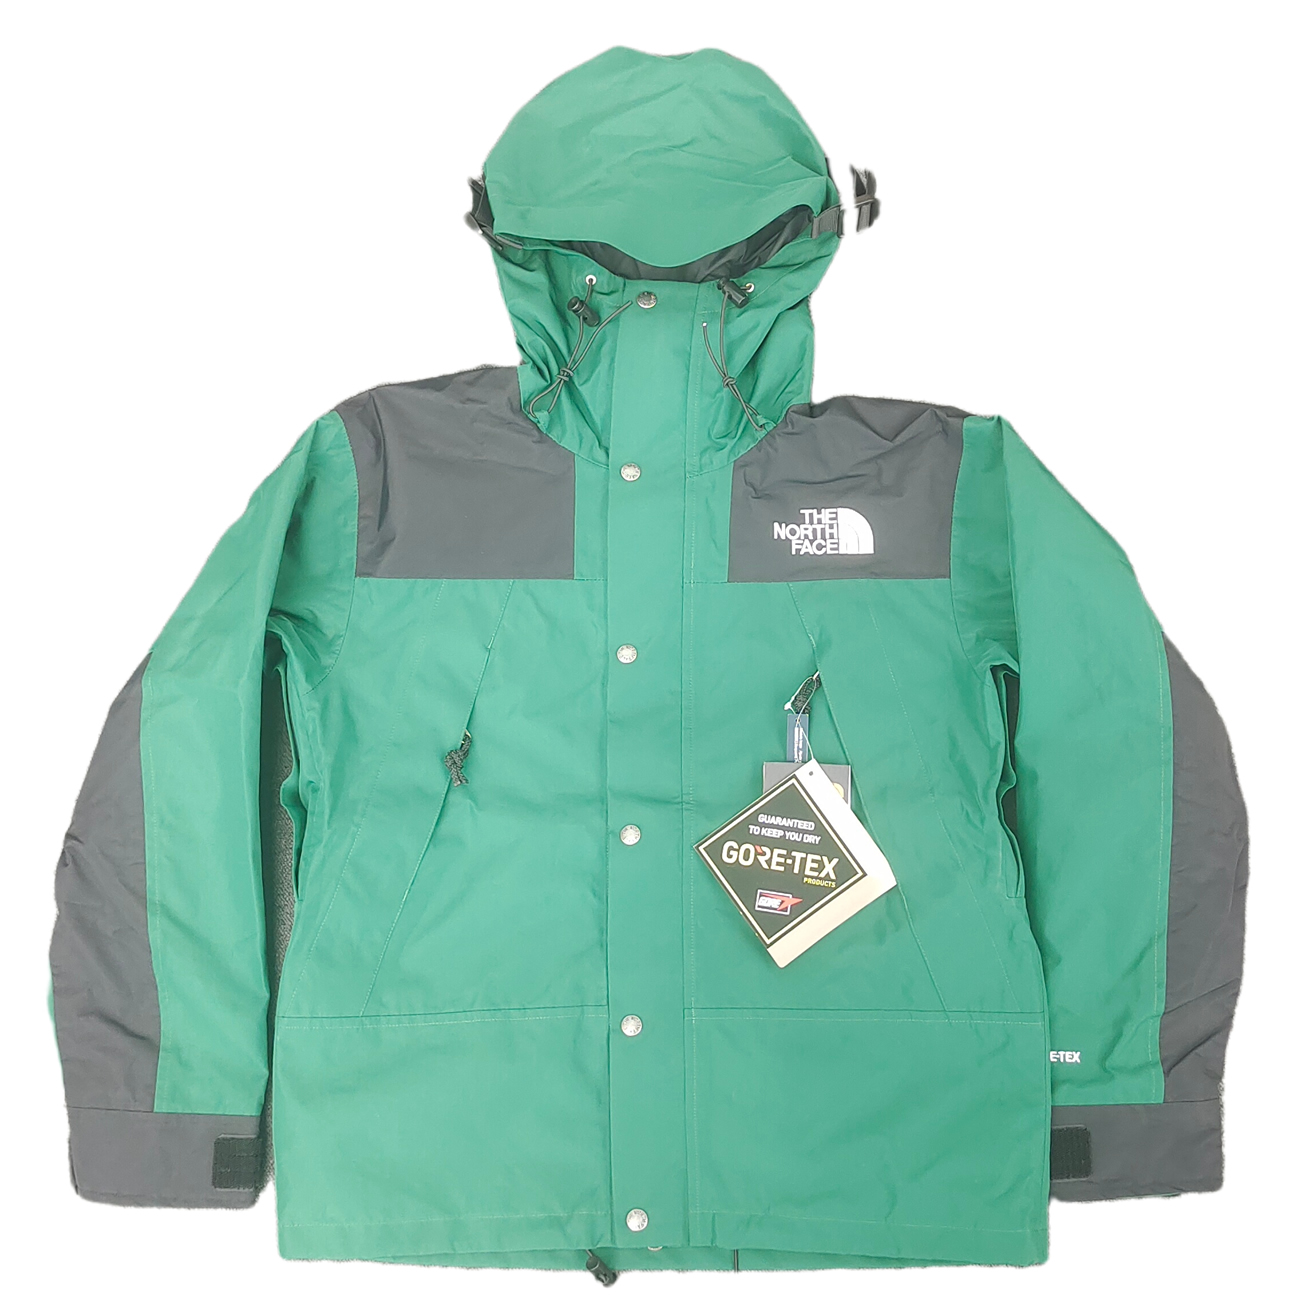 The North Face 1990 Mountain Jacket Gore Tex (1) - newkick.org